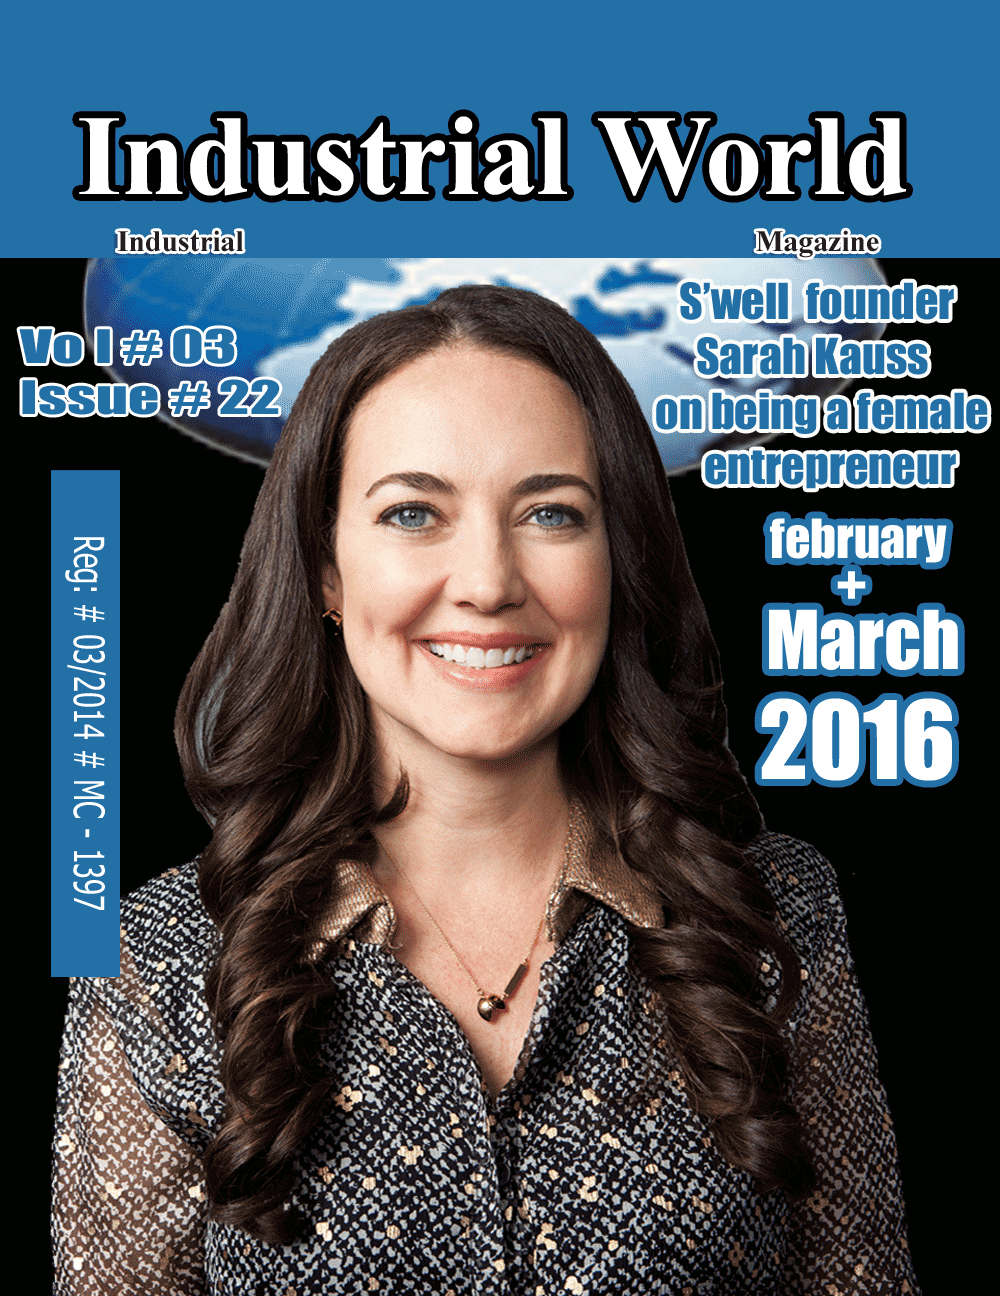 Tittle-Page-for-March-2016